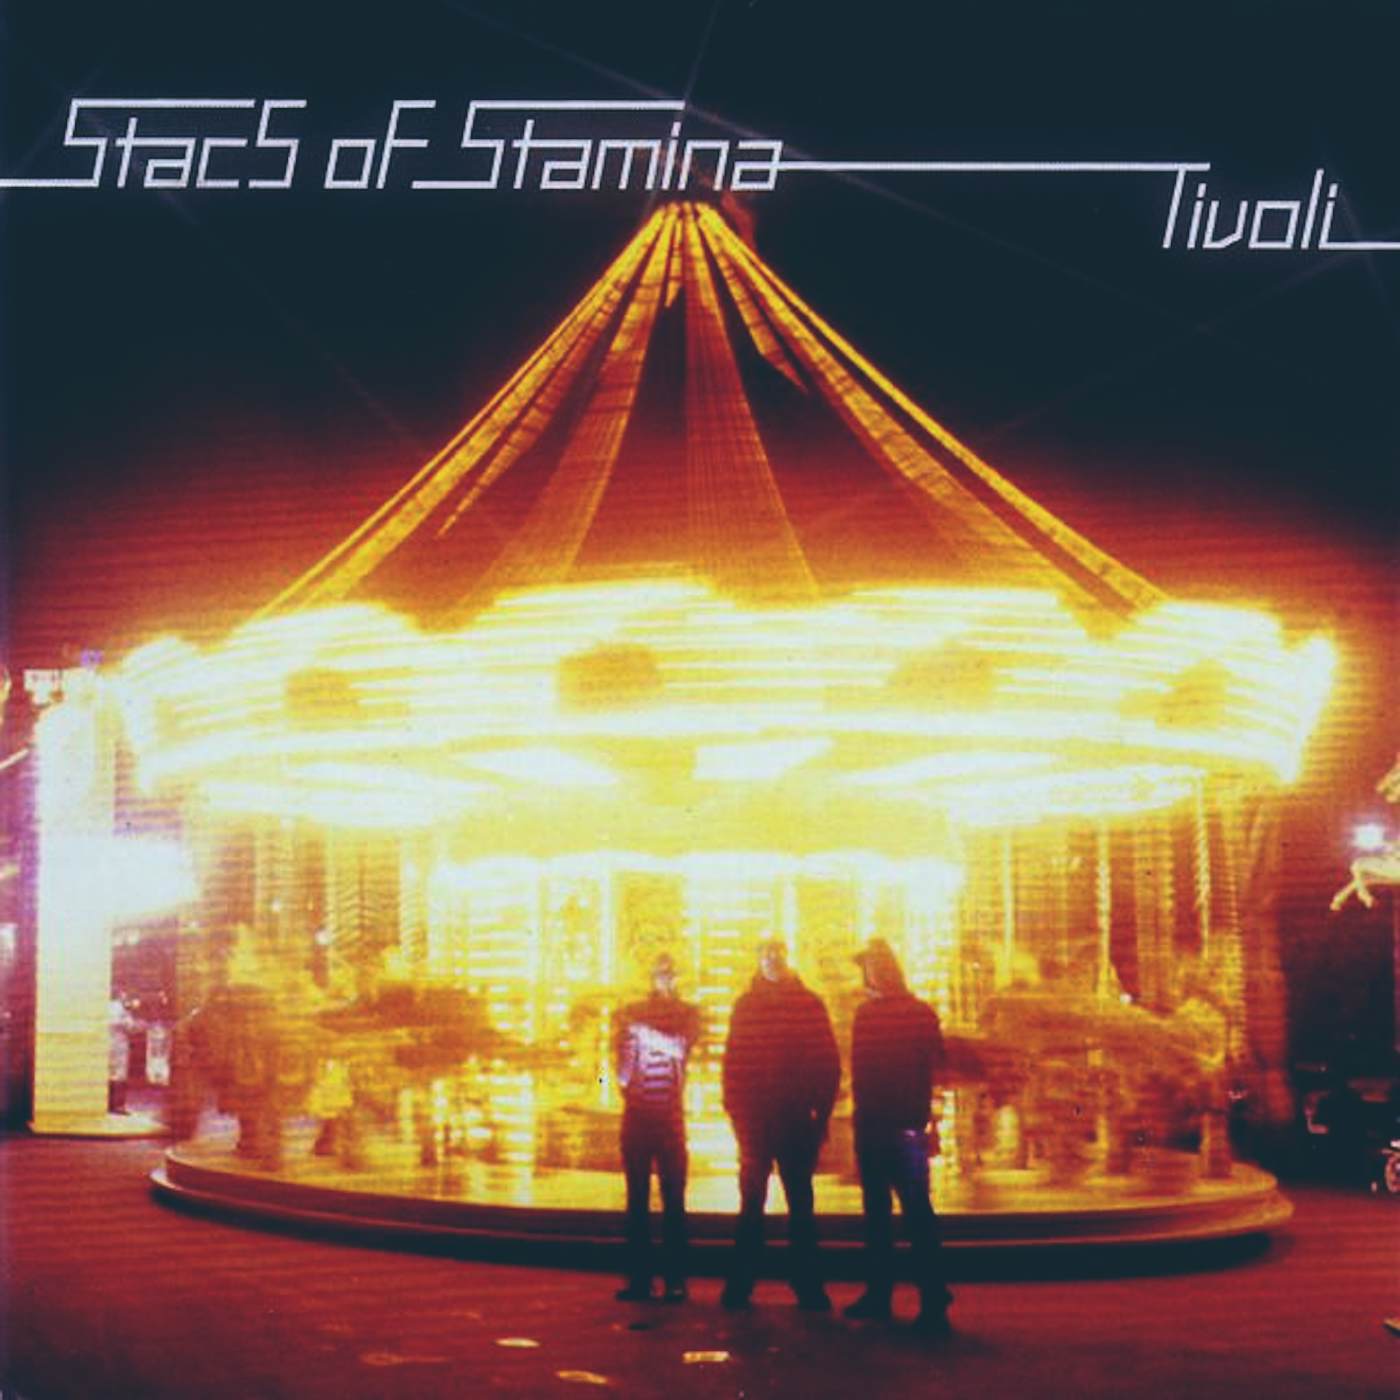 Stacs Of Stamina